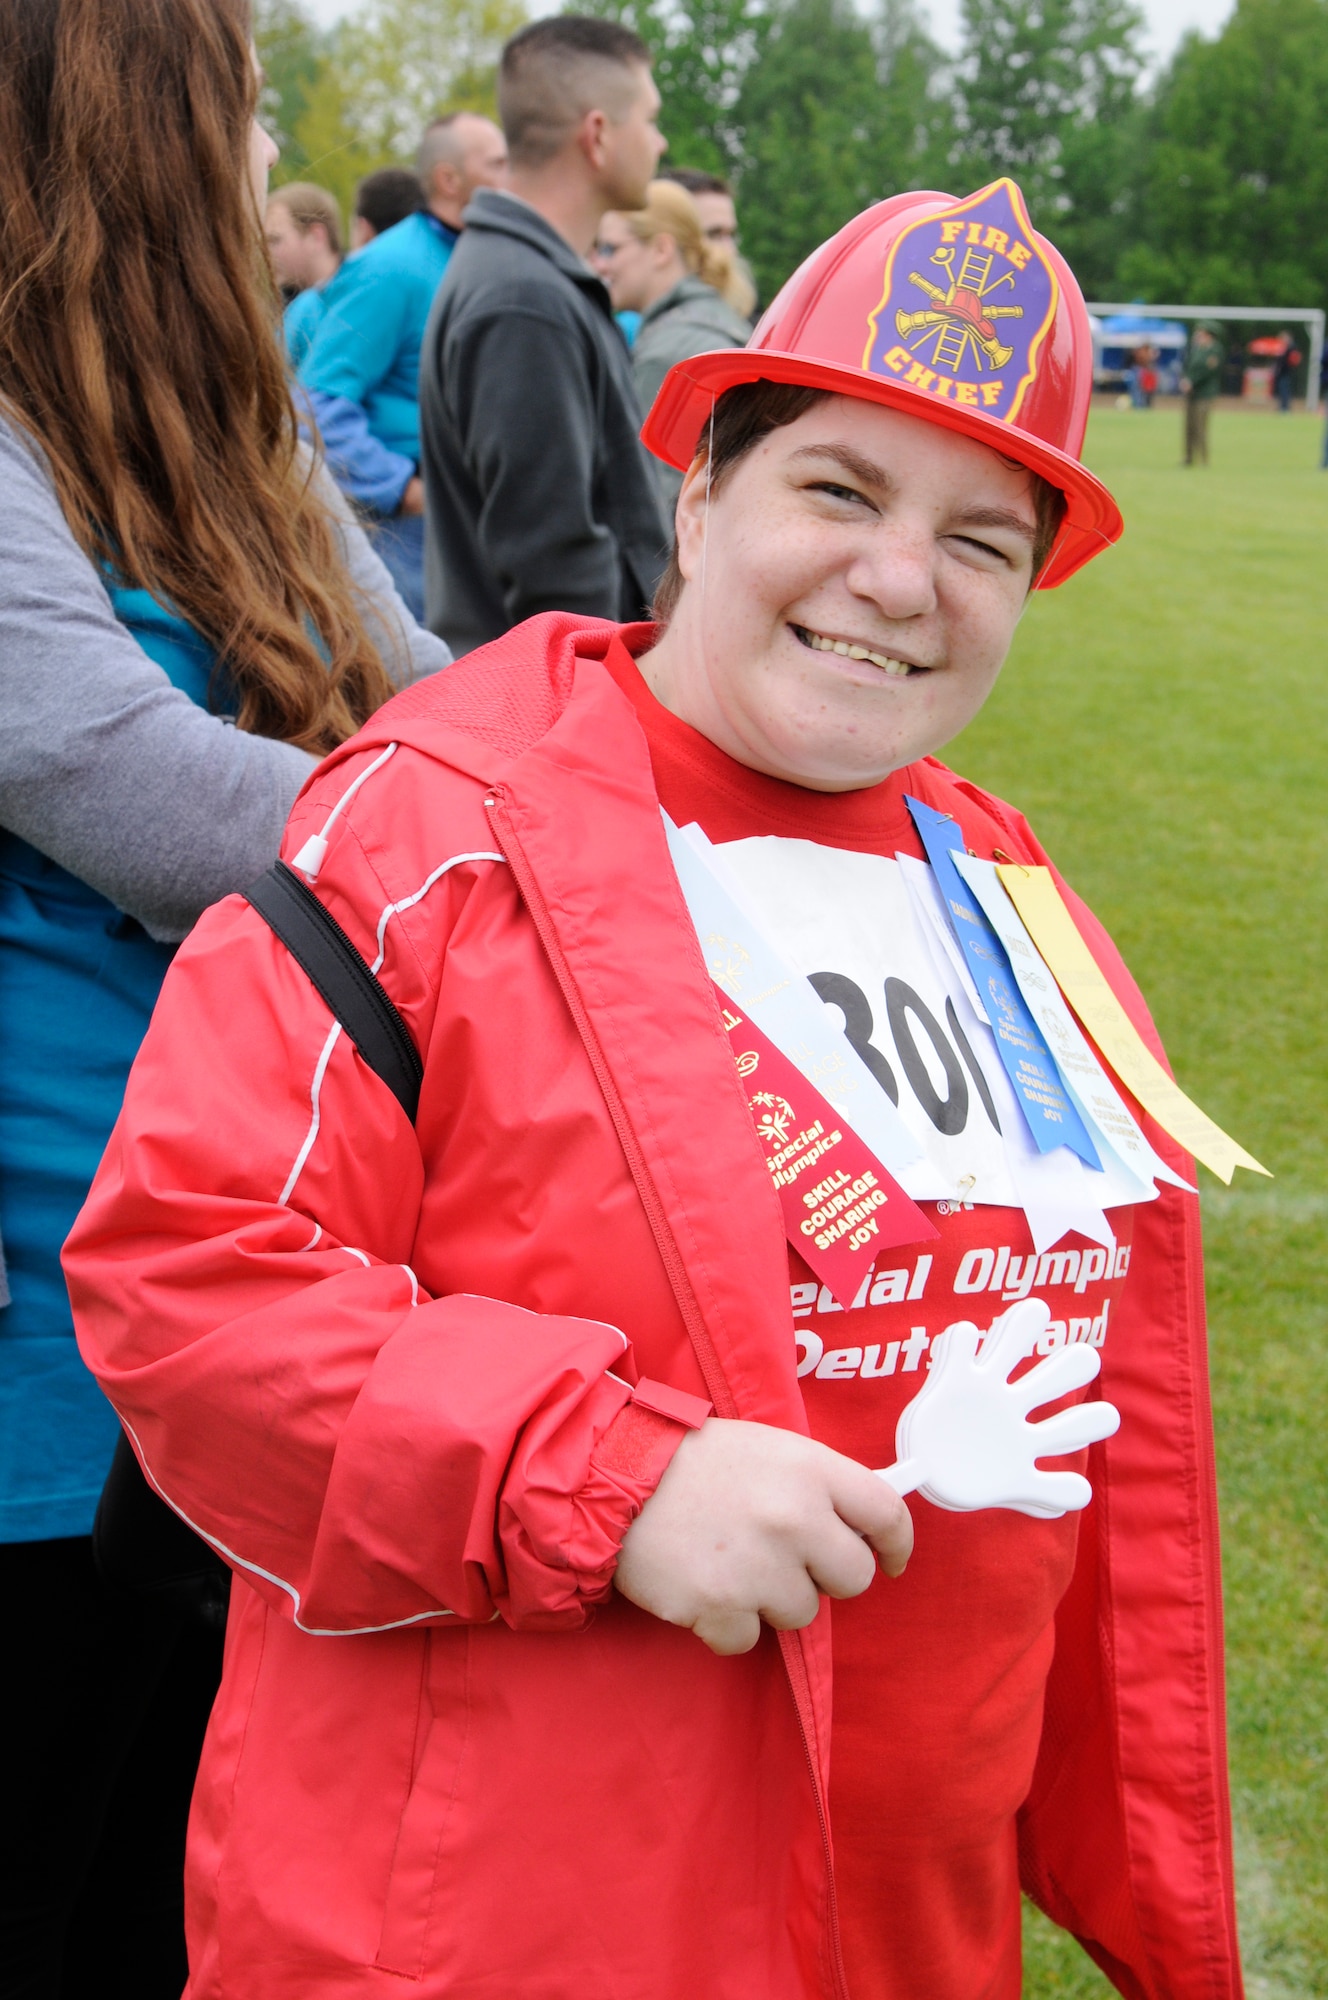 Nicole, an athlete, poses for a photo during the Special Olympics, Enkenbach-Alsenborn, Germany, May 12, 2010. Special Olympics is a worldwide event for children and adults with disabilities to build confidence and foster friendships. The Kaiserslautern Military Community hosted its 27th Annual Special Olympics for over 800 athletes. (U.S. Air Force photo by Airman 1st Class Brittany Perry)